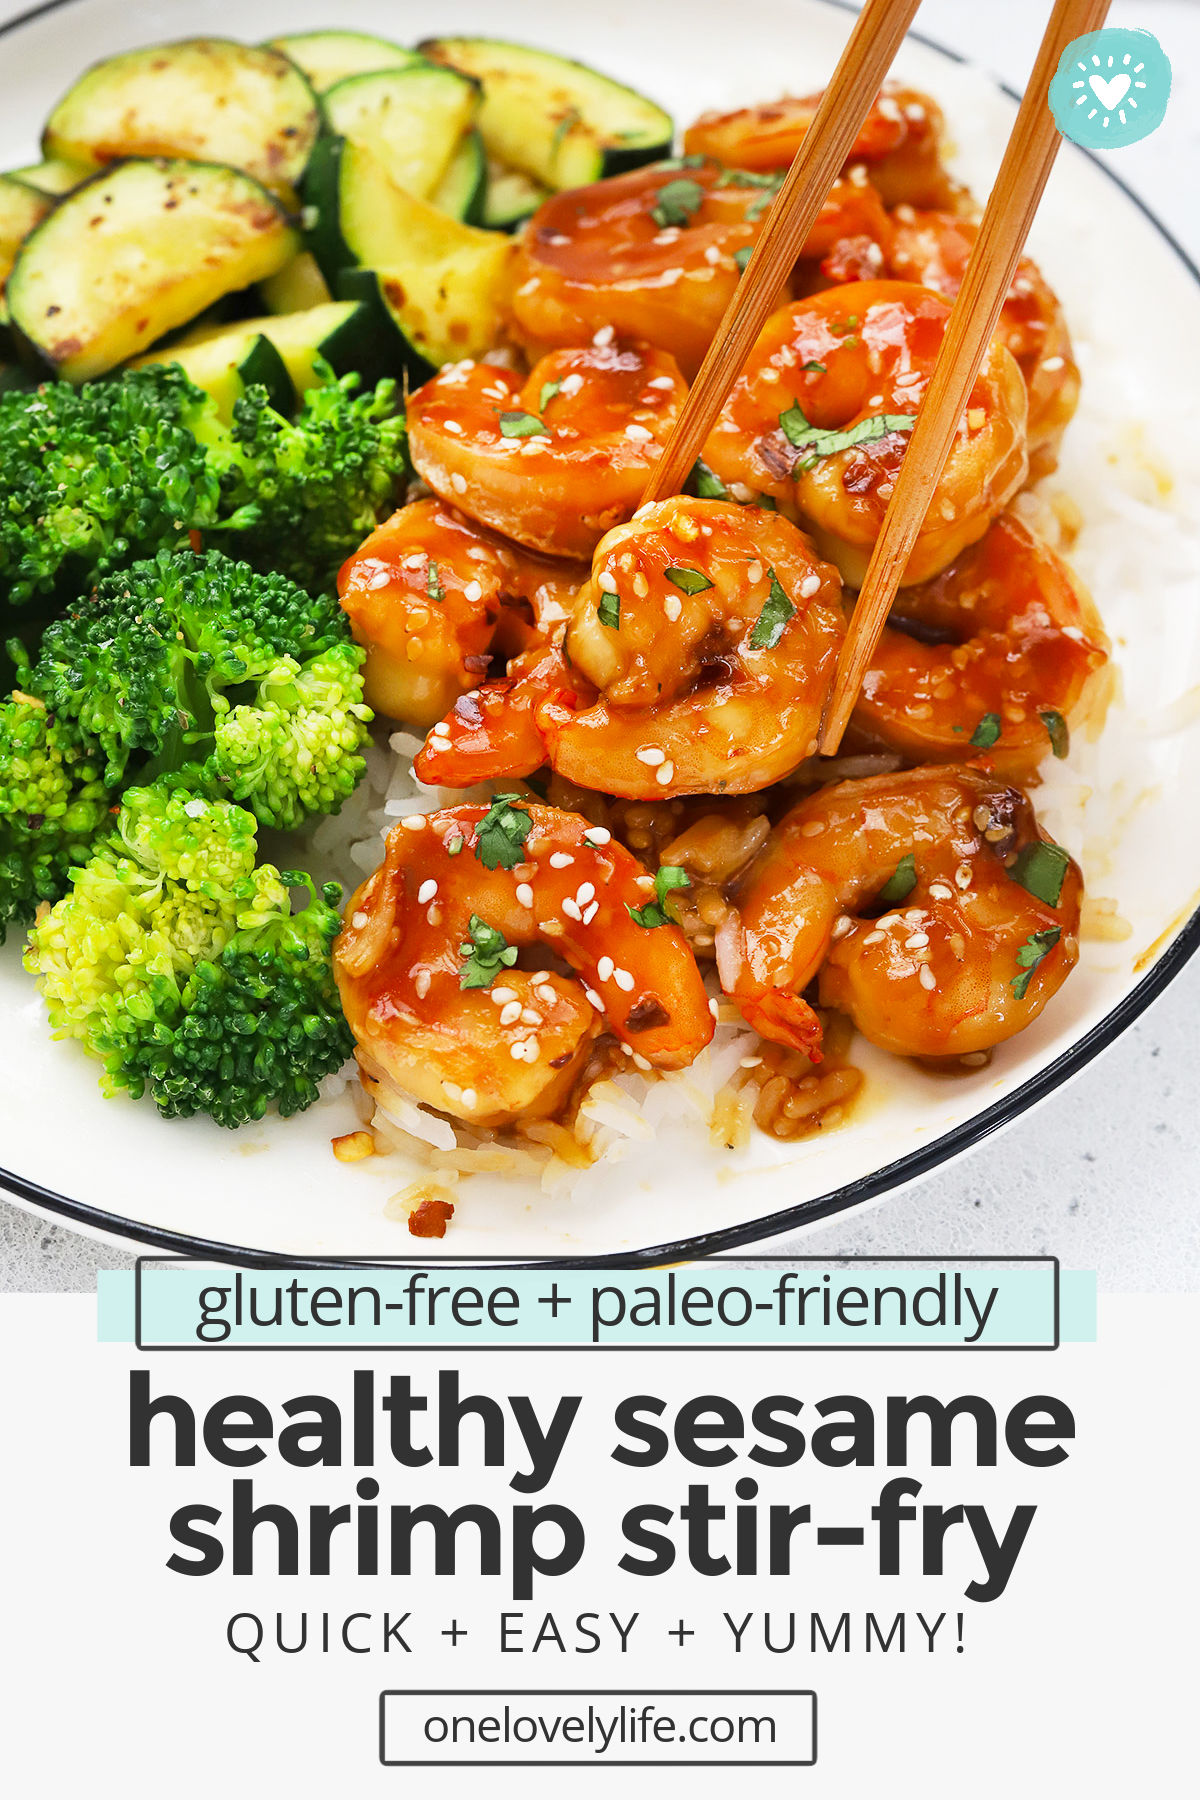 Easy Sesame Shrimp - Quick and easy healthy shrimp stir fry with a sweet, tangy sesame sauce. We LOVE this easy dinner! (Gluten-Free, Paleo-Friendly)// Healthy Sesame Shrimp Stir Fry // Paleo Shrimp Stir Fry // Gluten-Free Shrimp Stir Fry // Honey Sesame Shrimp // Sesame Garlic Shrimp #shrimp #stirfry #glutenfree #paleo